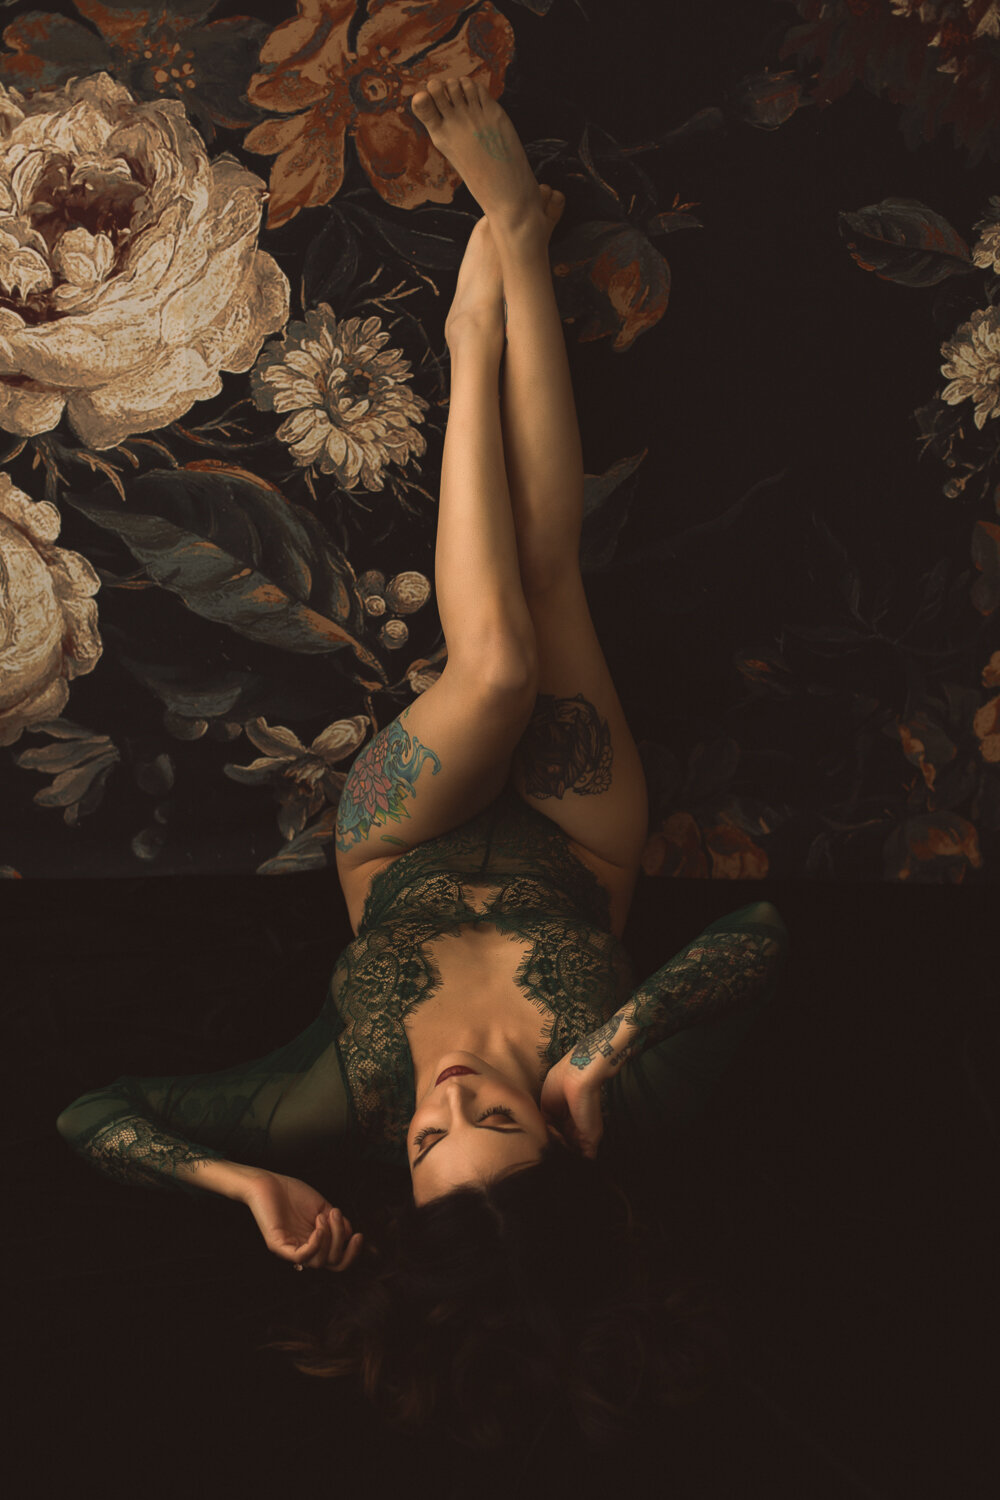 Boudoir photo of a woman with legs for days - and great ink!